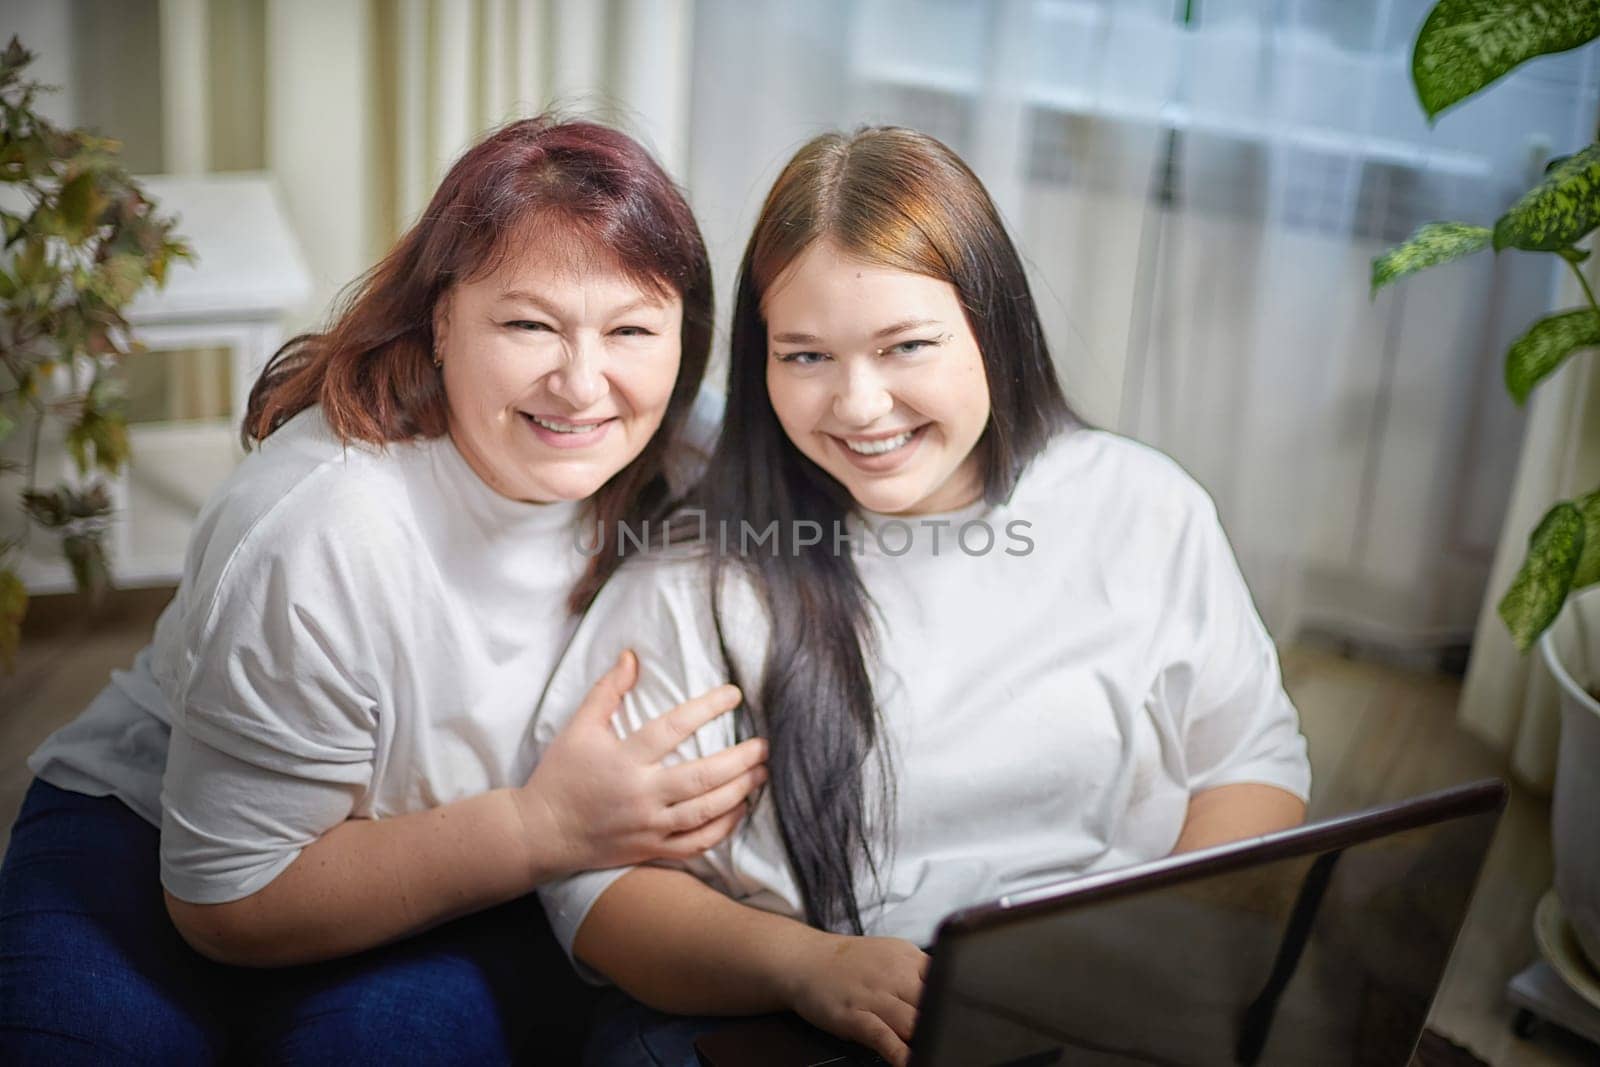 Fat funny funny adult mother and daughter with laptop indoors. A teenage girl teaches a middle-aged woman modern technology. Internet, chatting